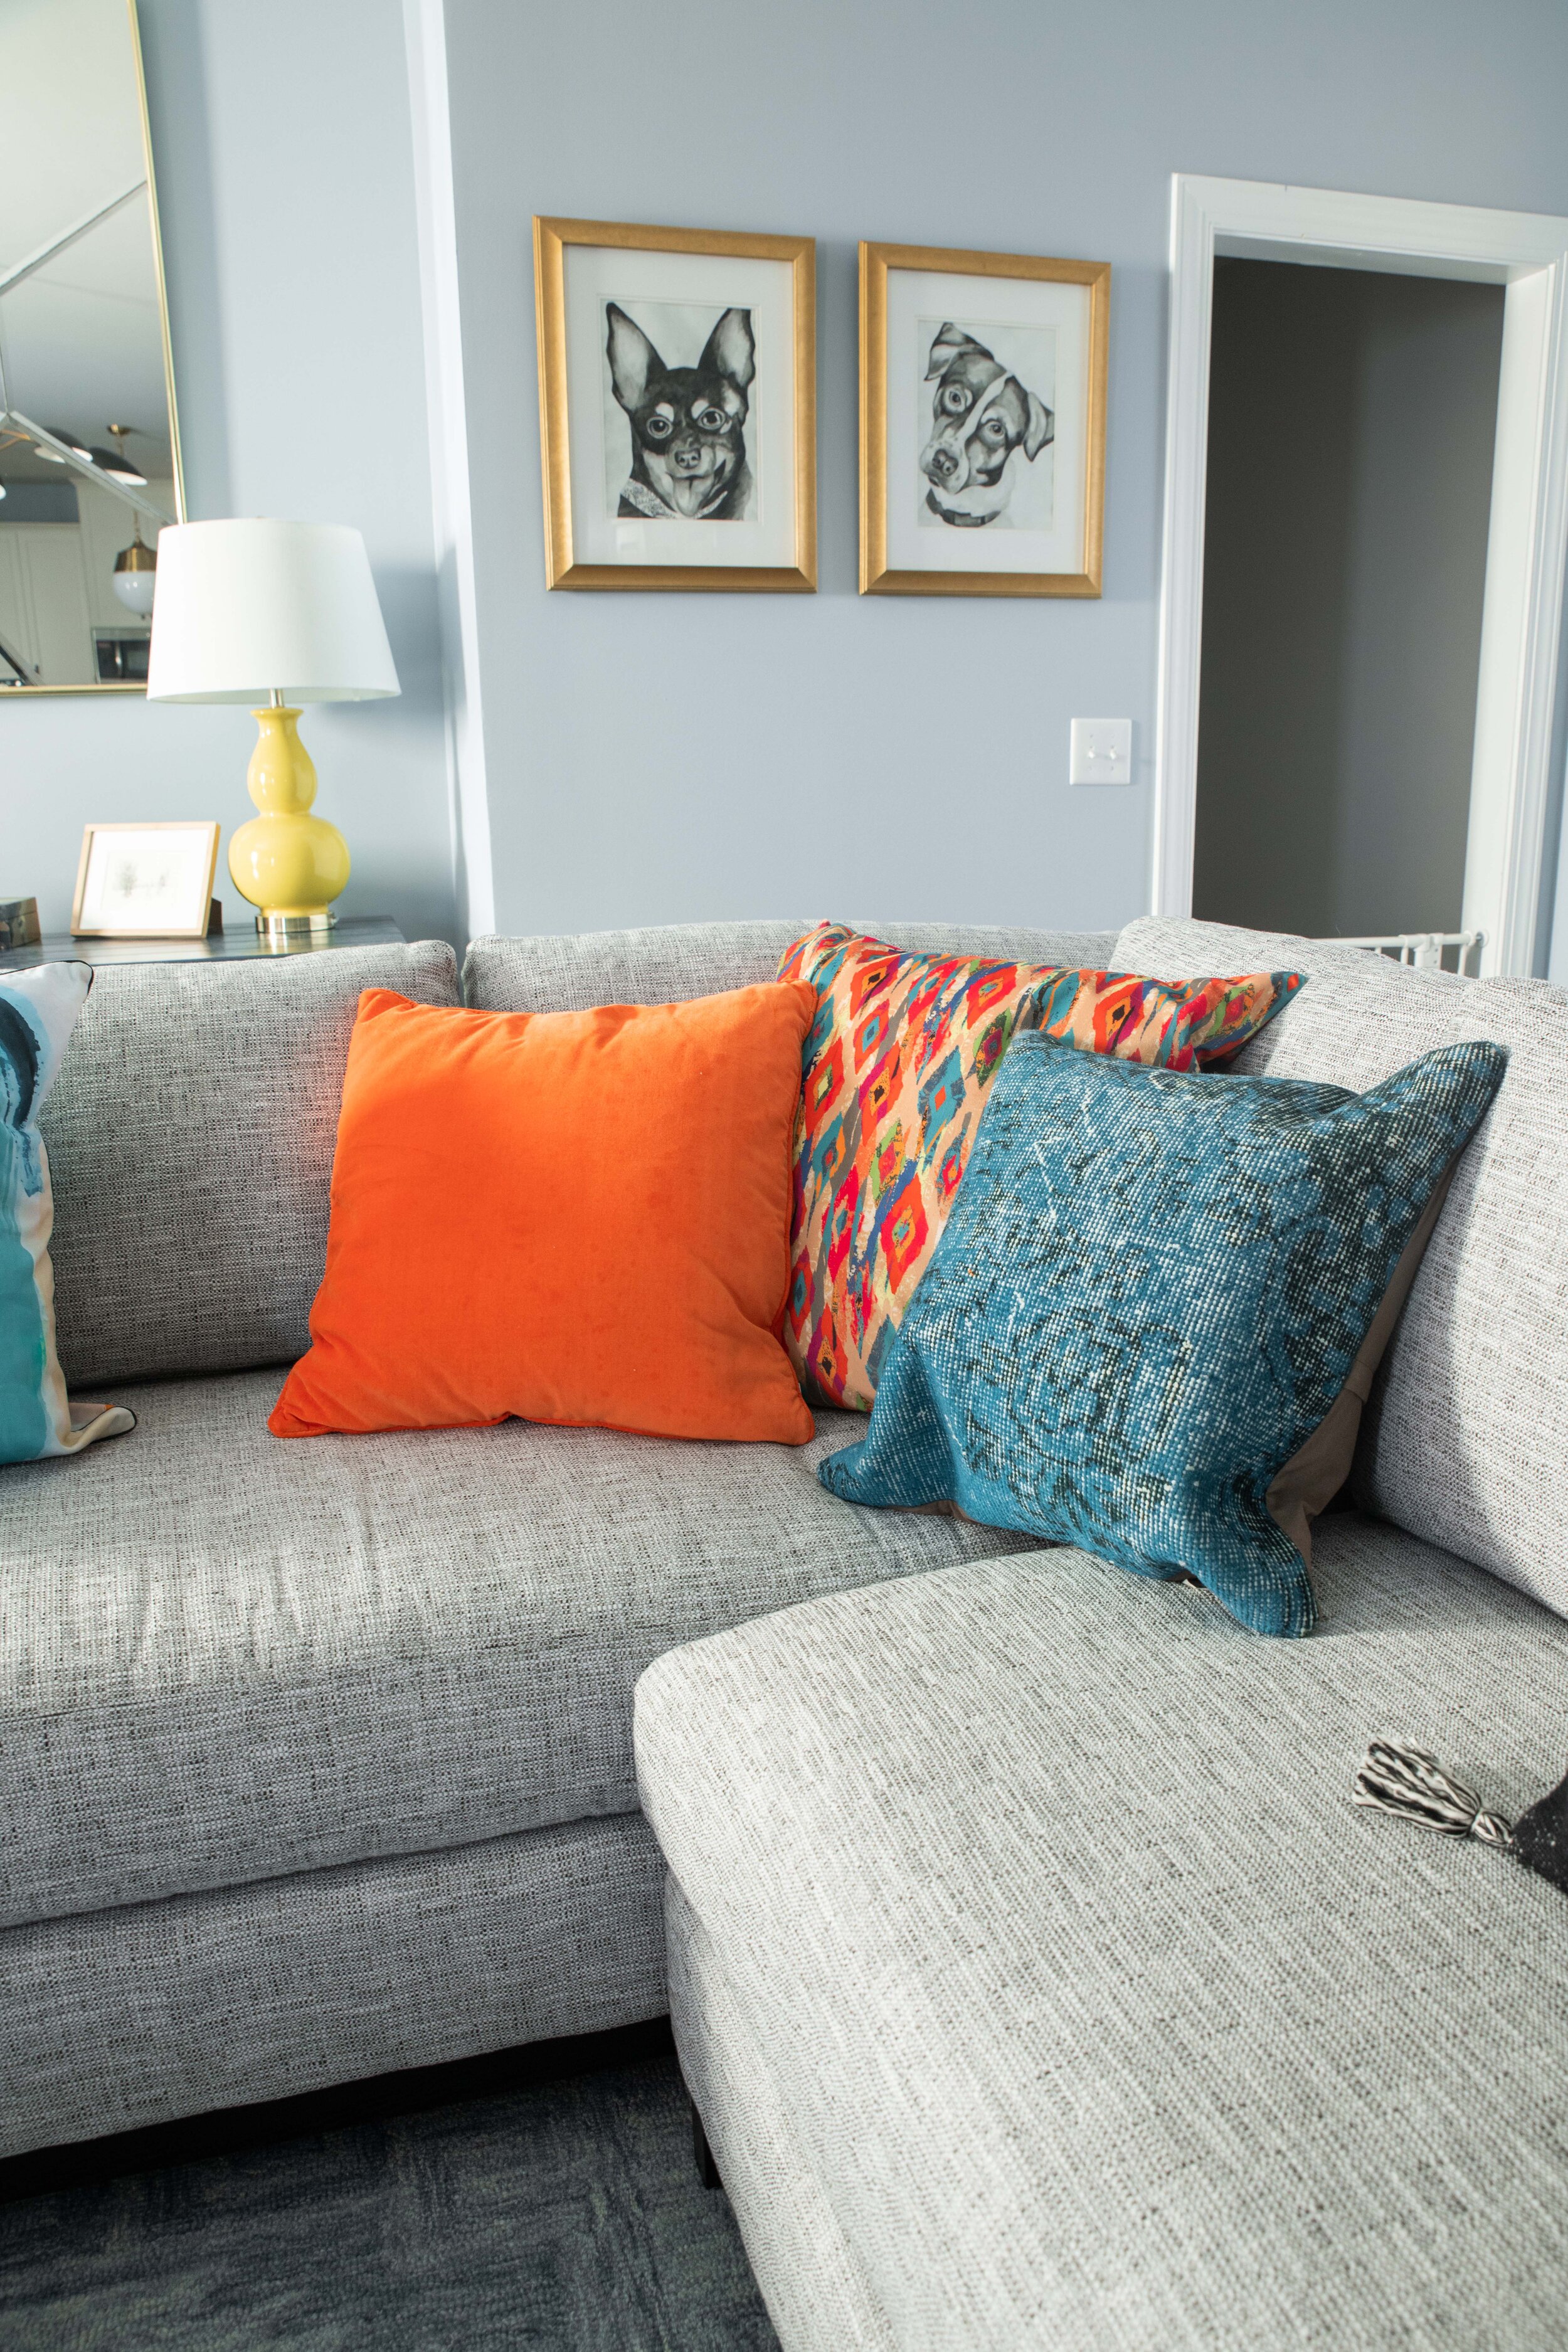 Dwell-Chic-Cool-Transitional-Home-Living-Room-Sofa-Details.jpg